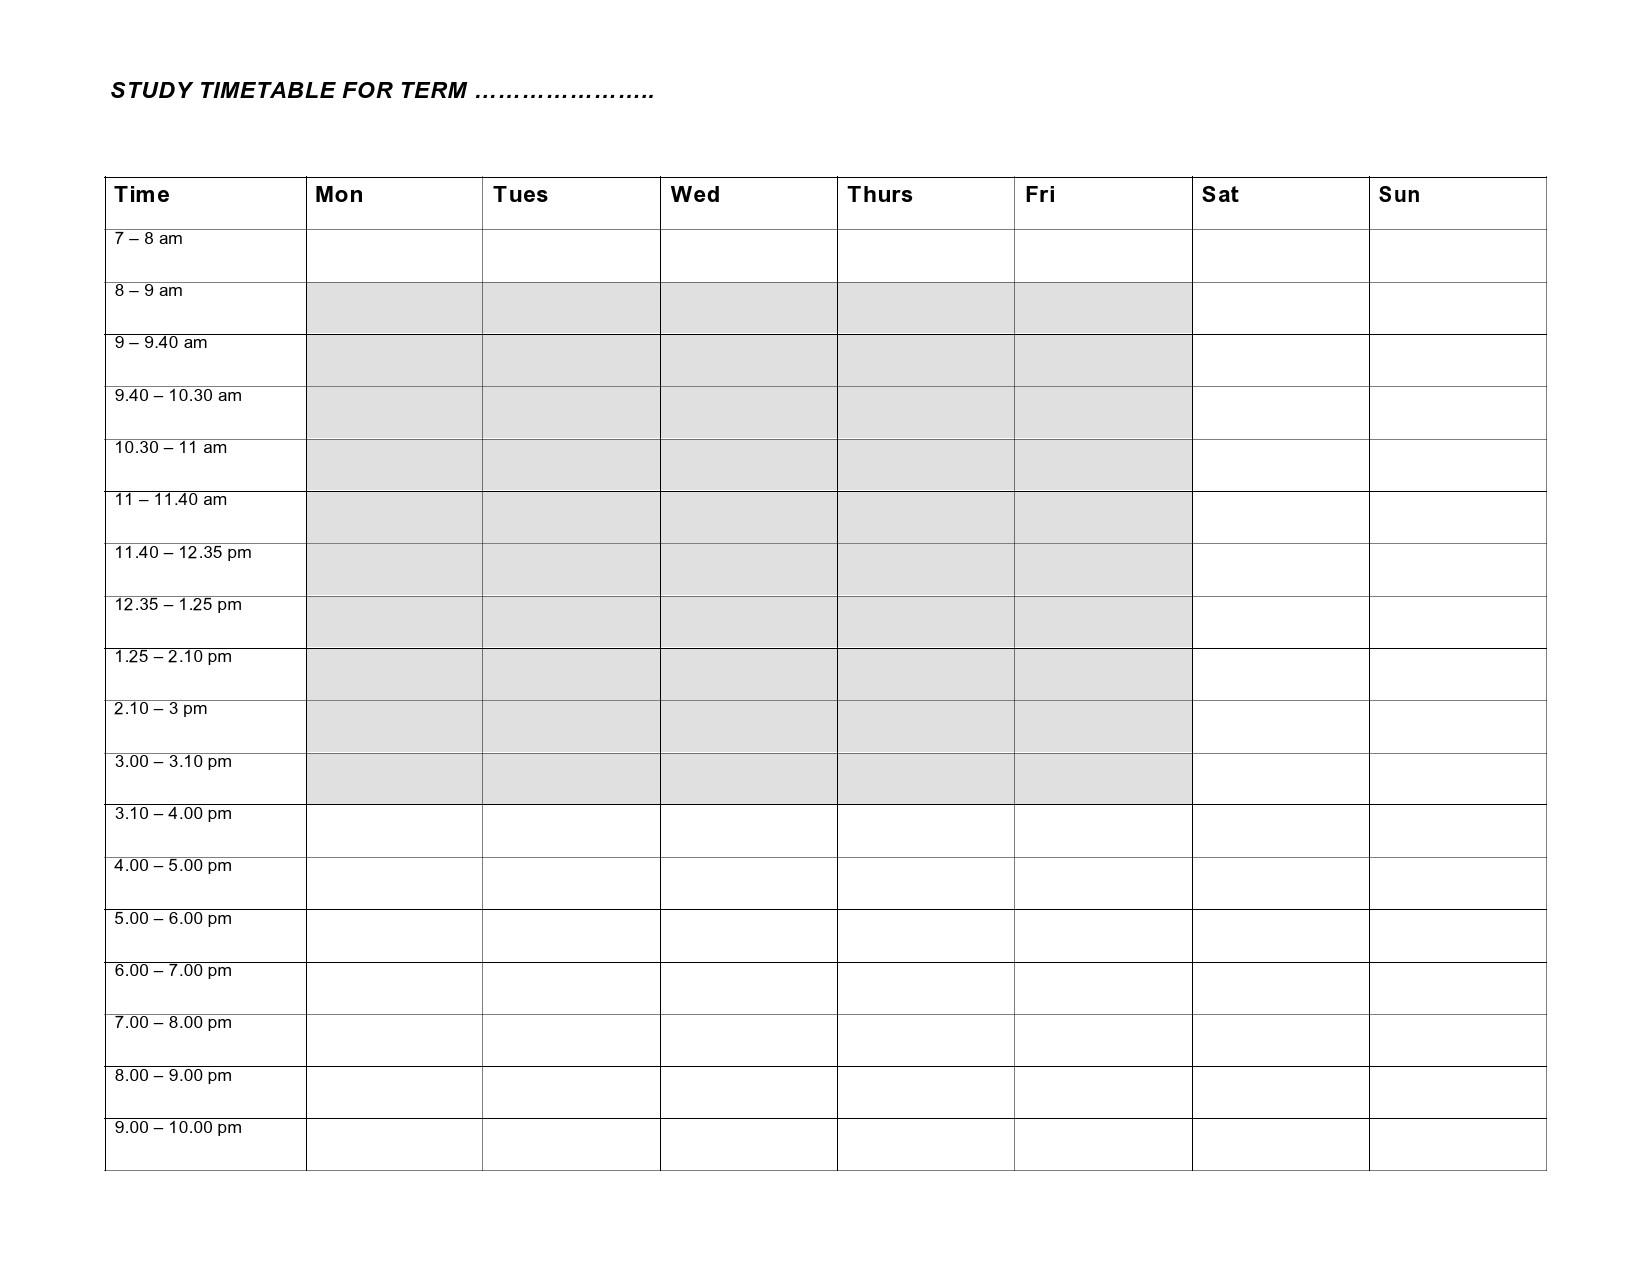 Free time study template 18